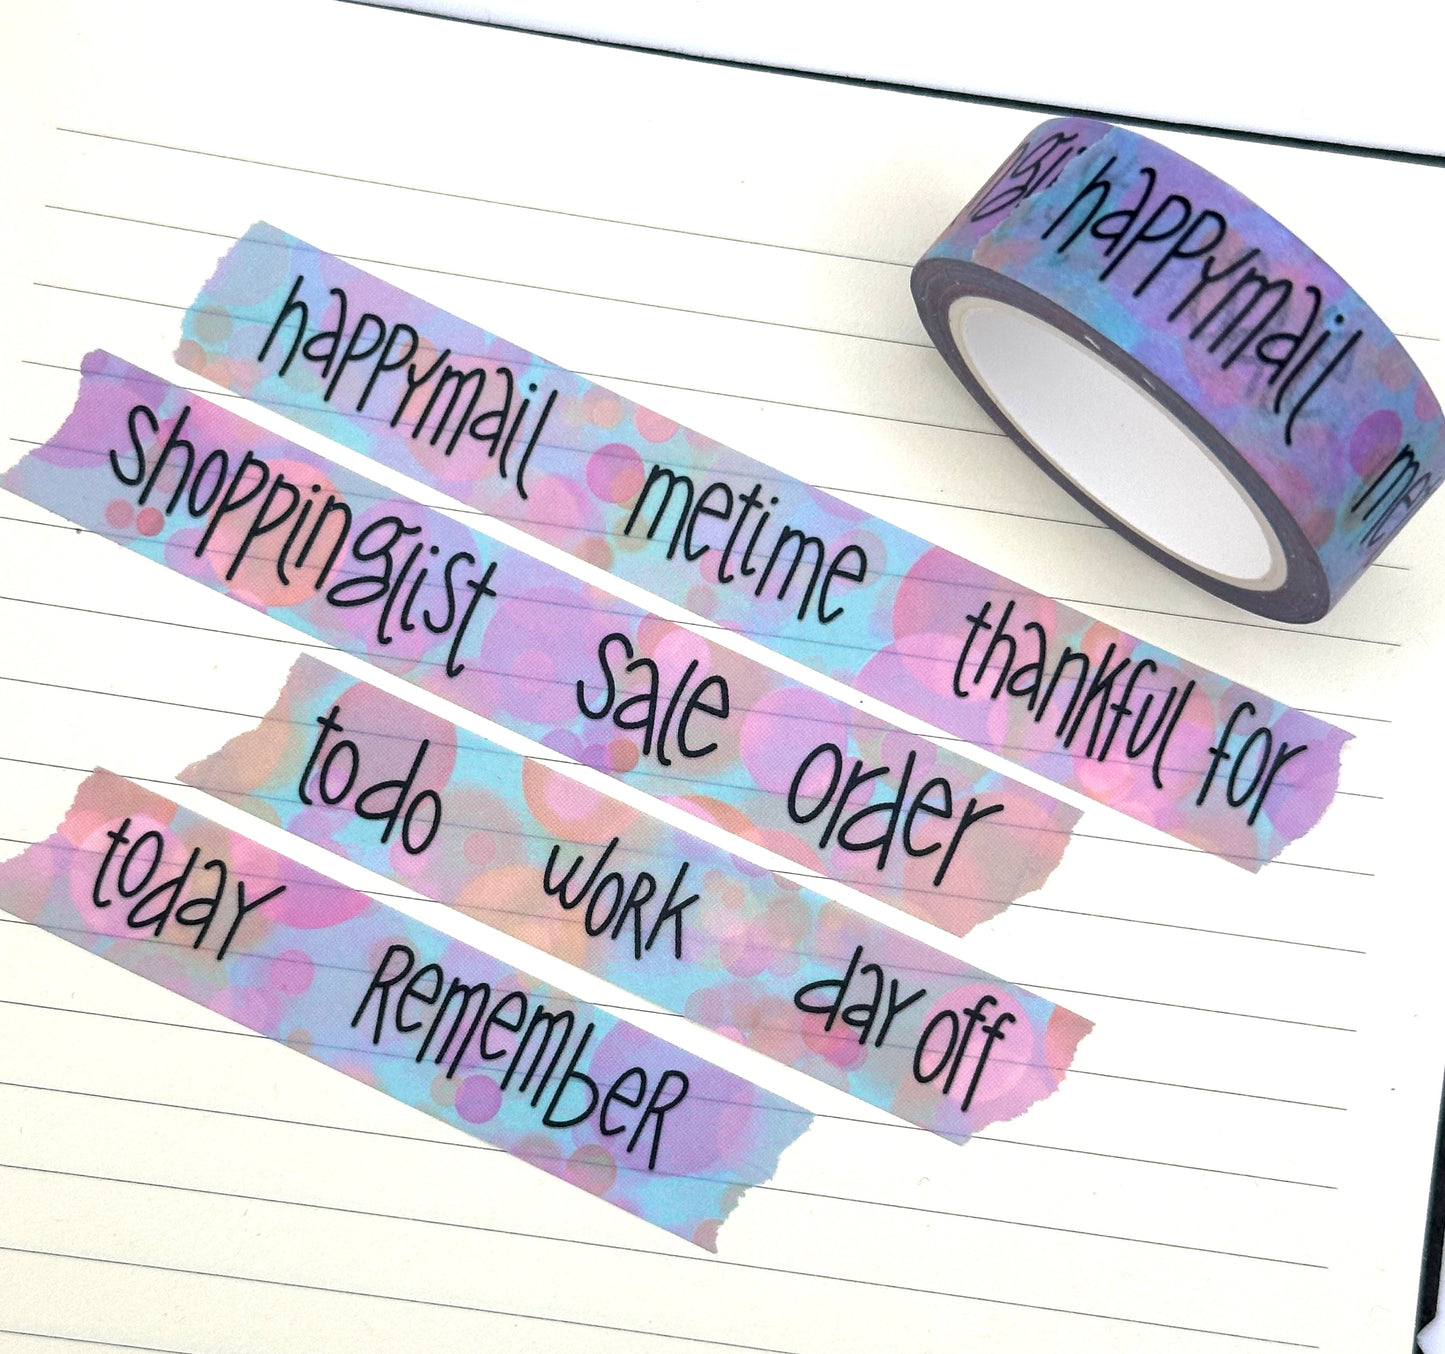 WASHI TAPE - Colorful with Words